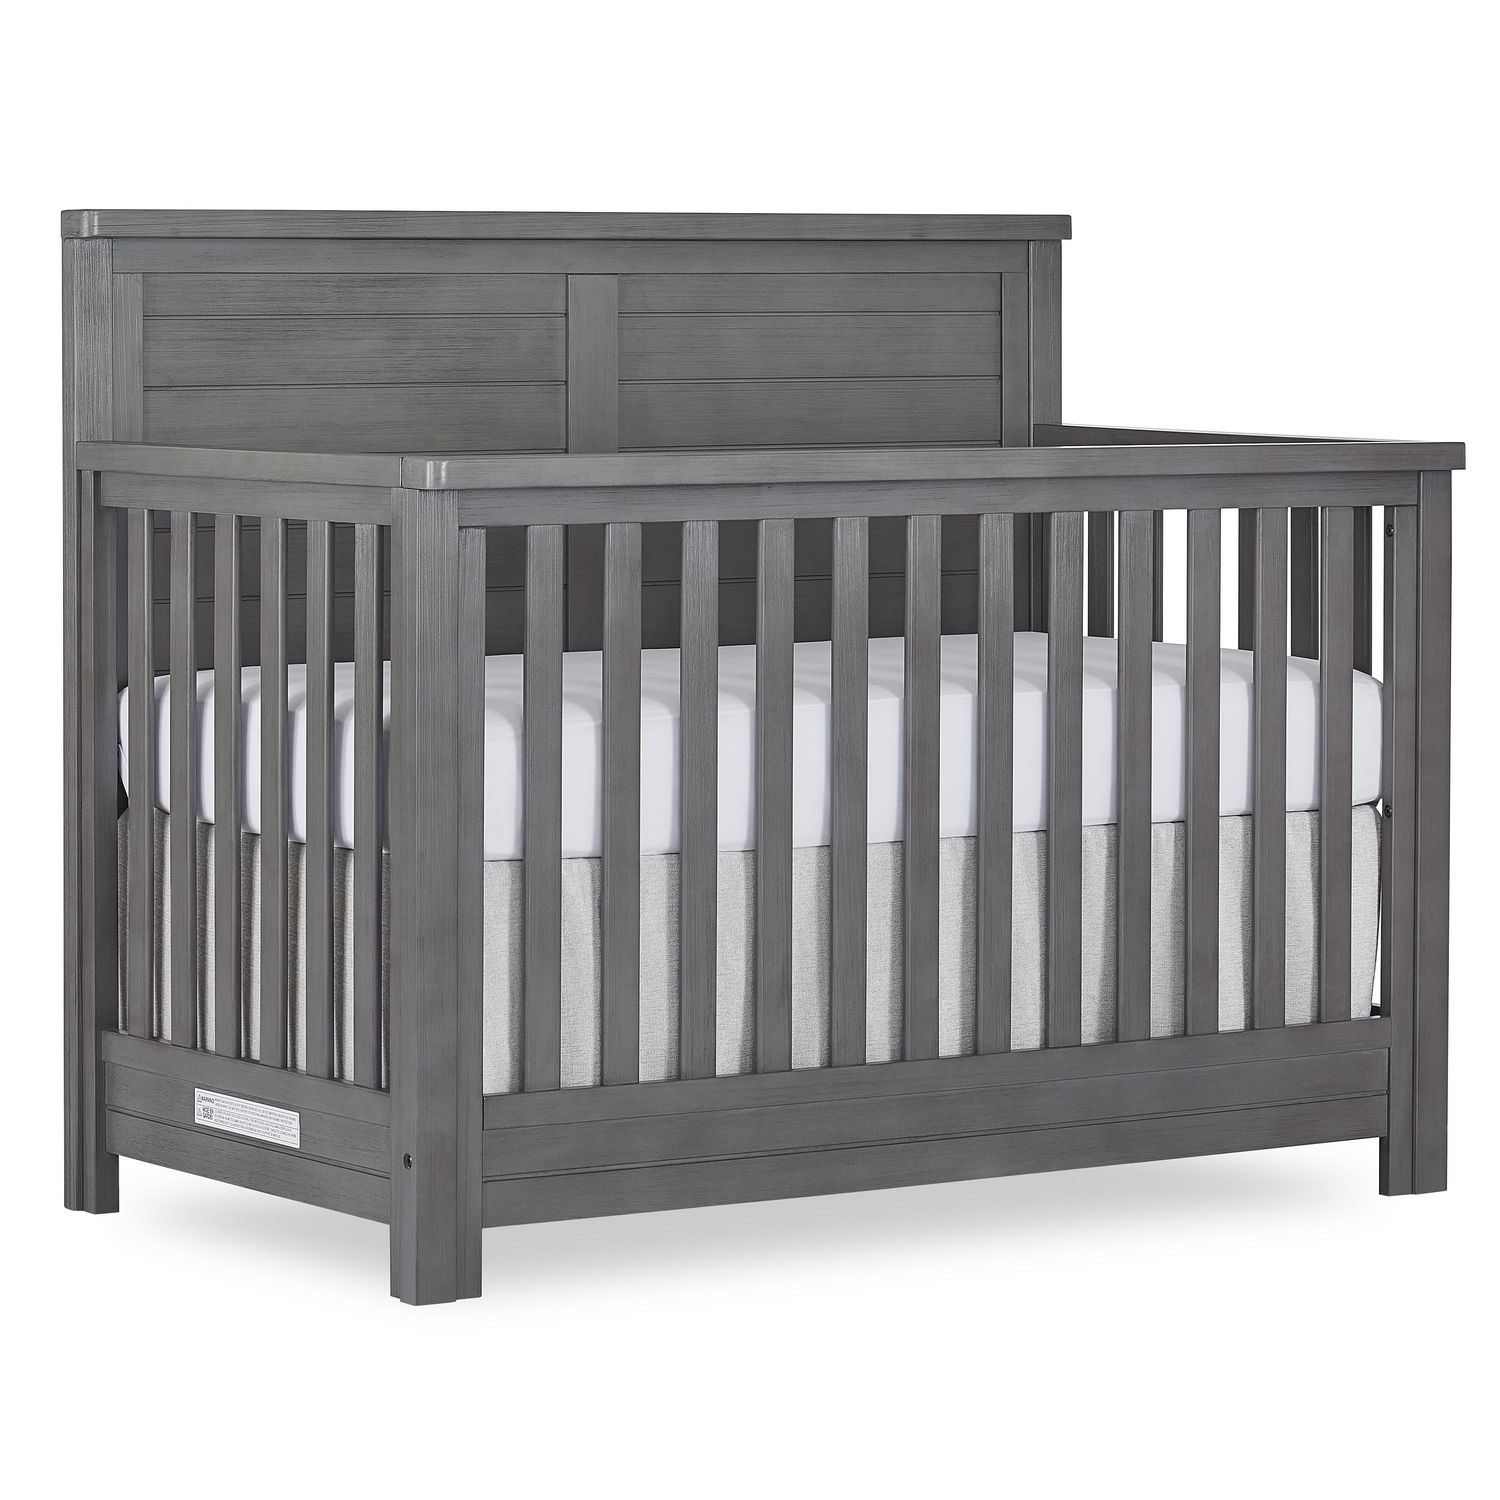 Evolur Madison 5 in 1 Convertible Crib and Tall Chest with Free Mattress Weathered Gray 